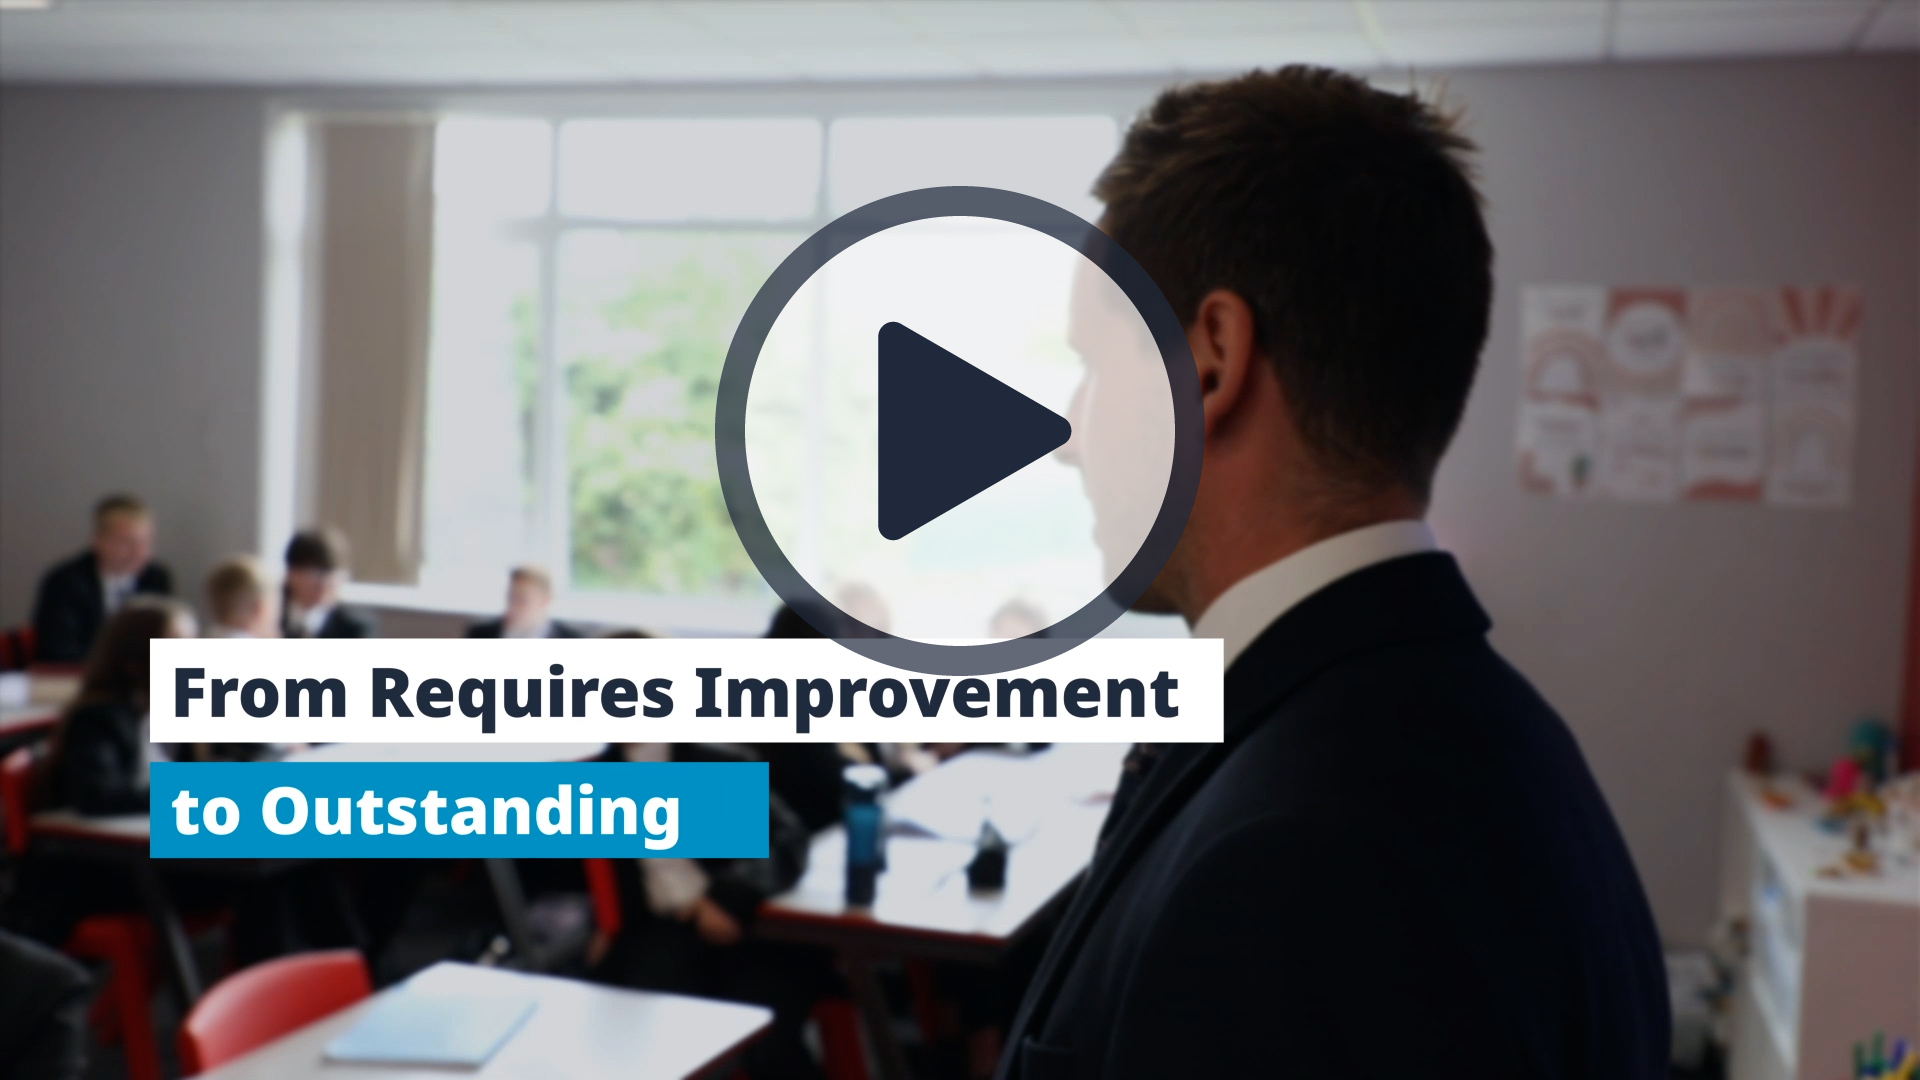 From requires improvement to outstanding video image